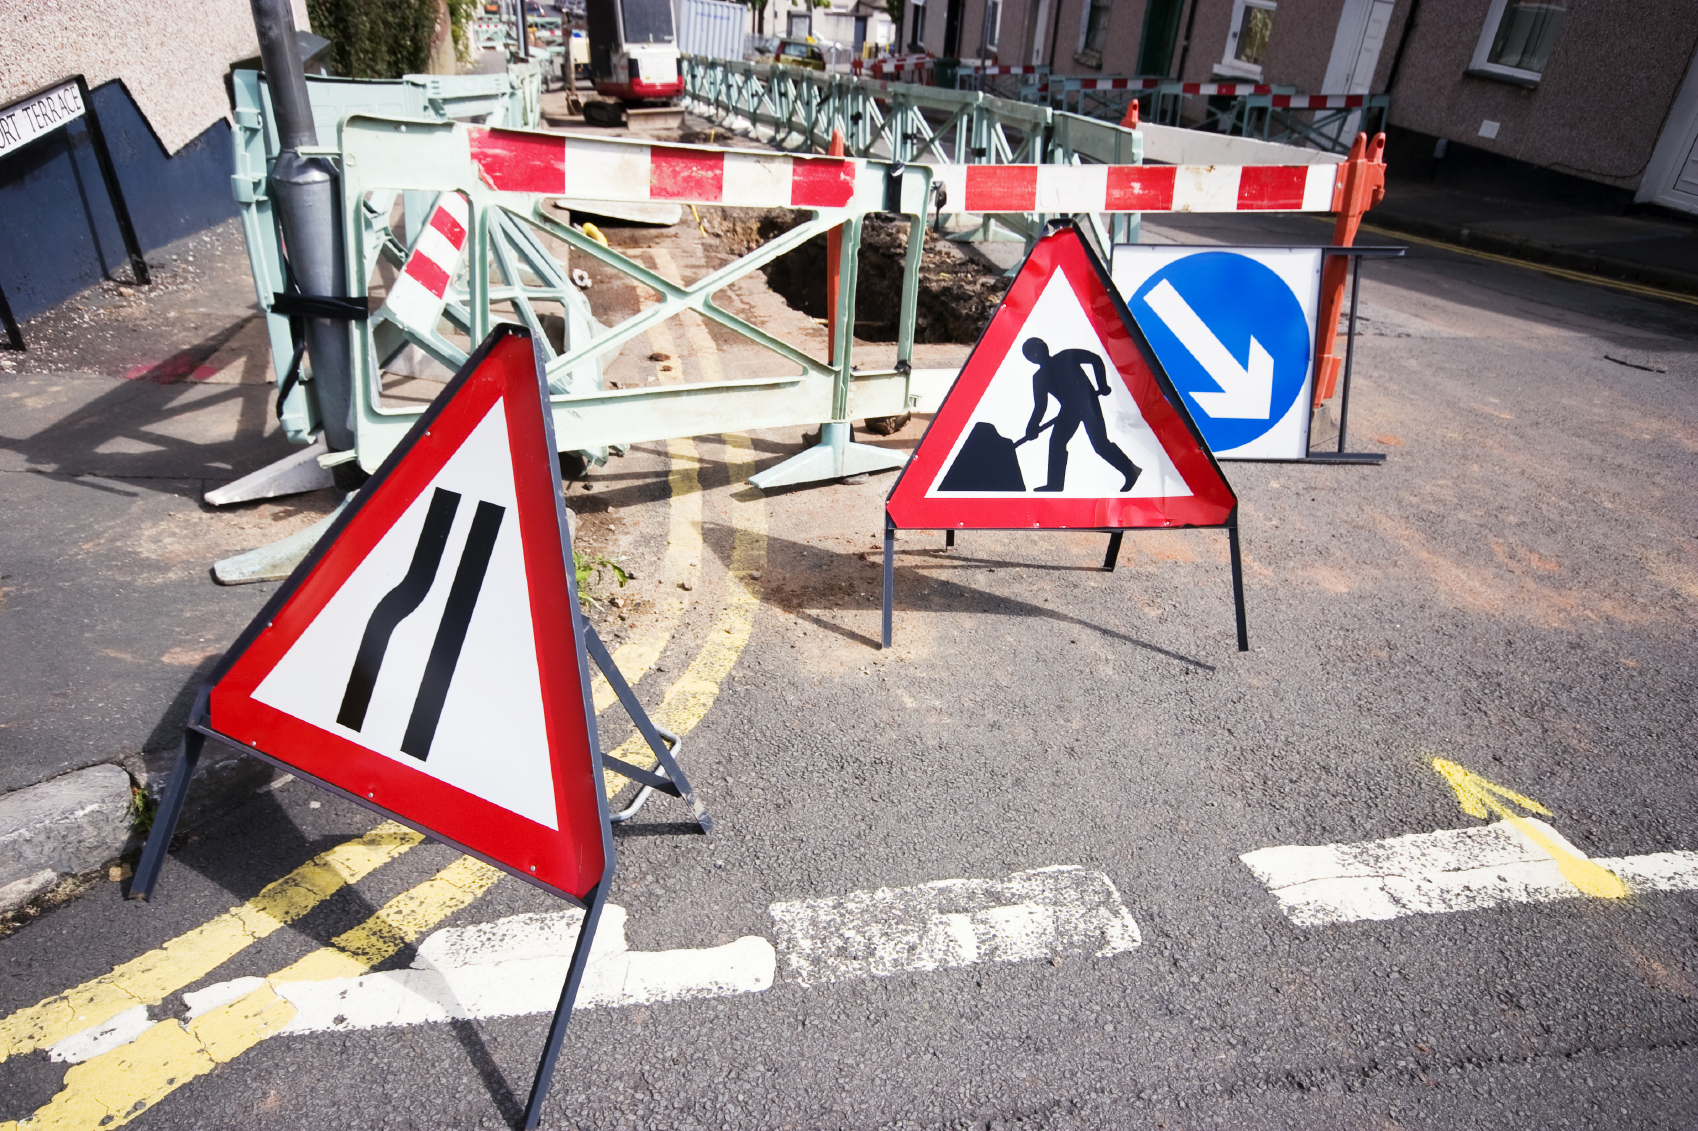 Vodafone slapped with £2,500 fine for roadworks violations - Mobile ...